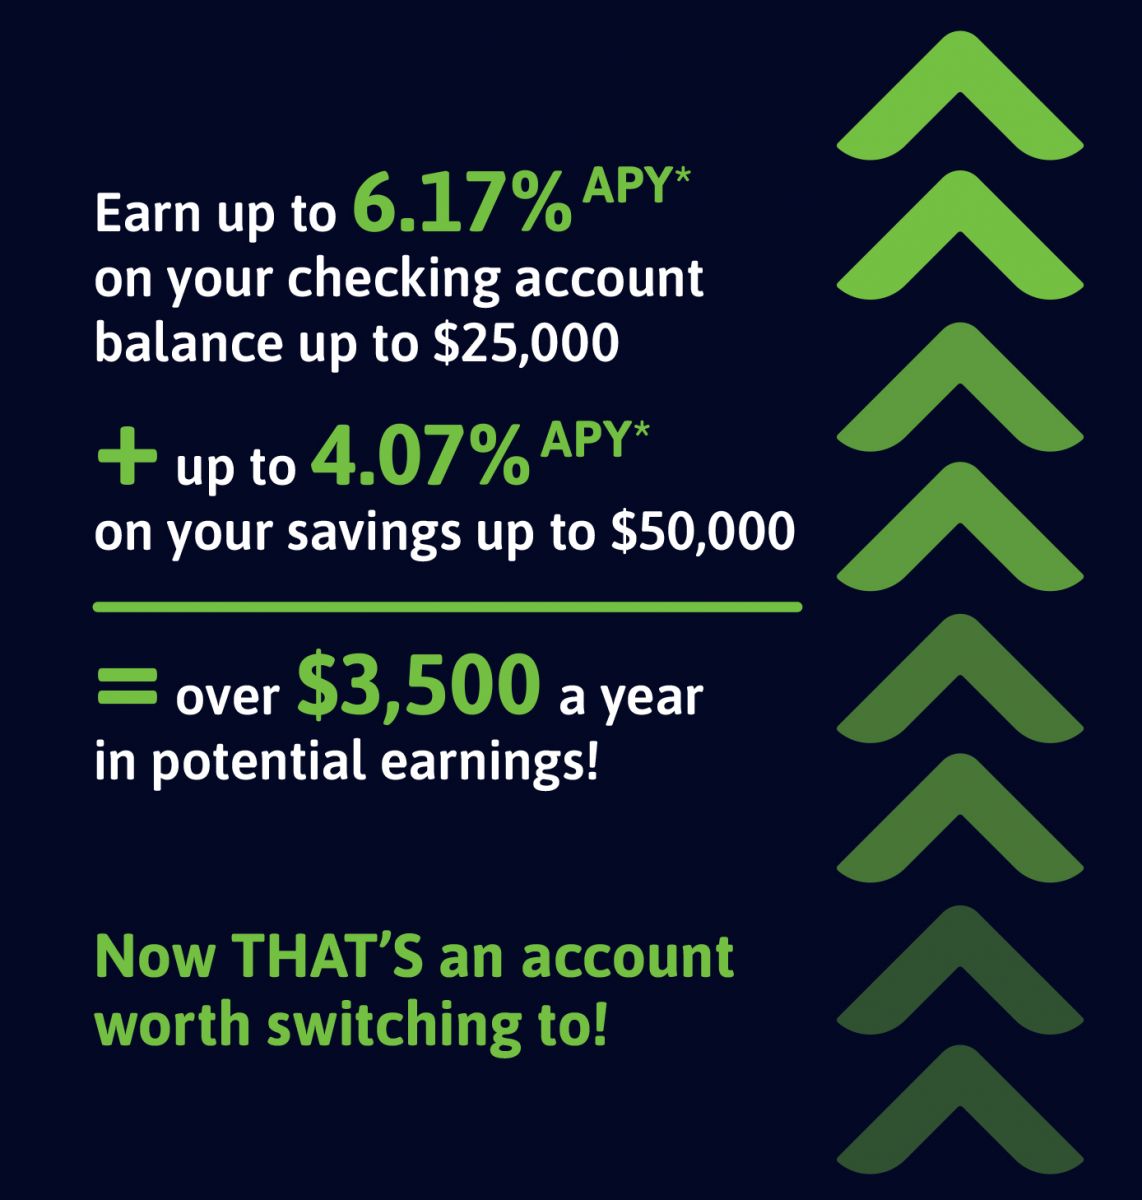 earn up to 6.17% APY* on your checking account balance up to $25,000